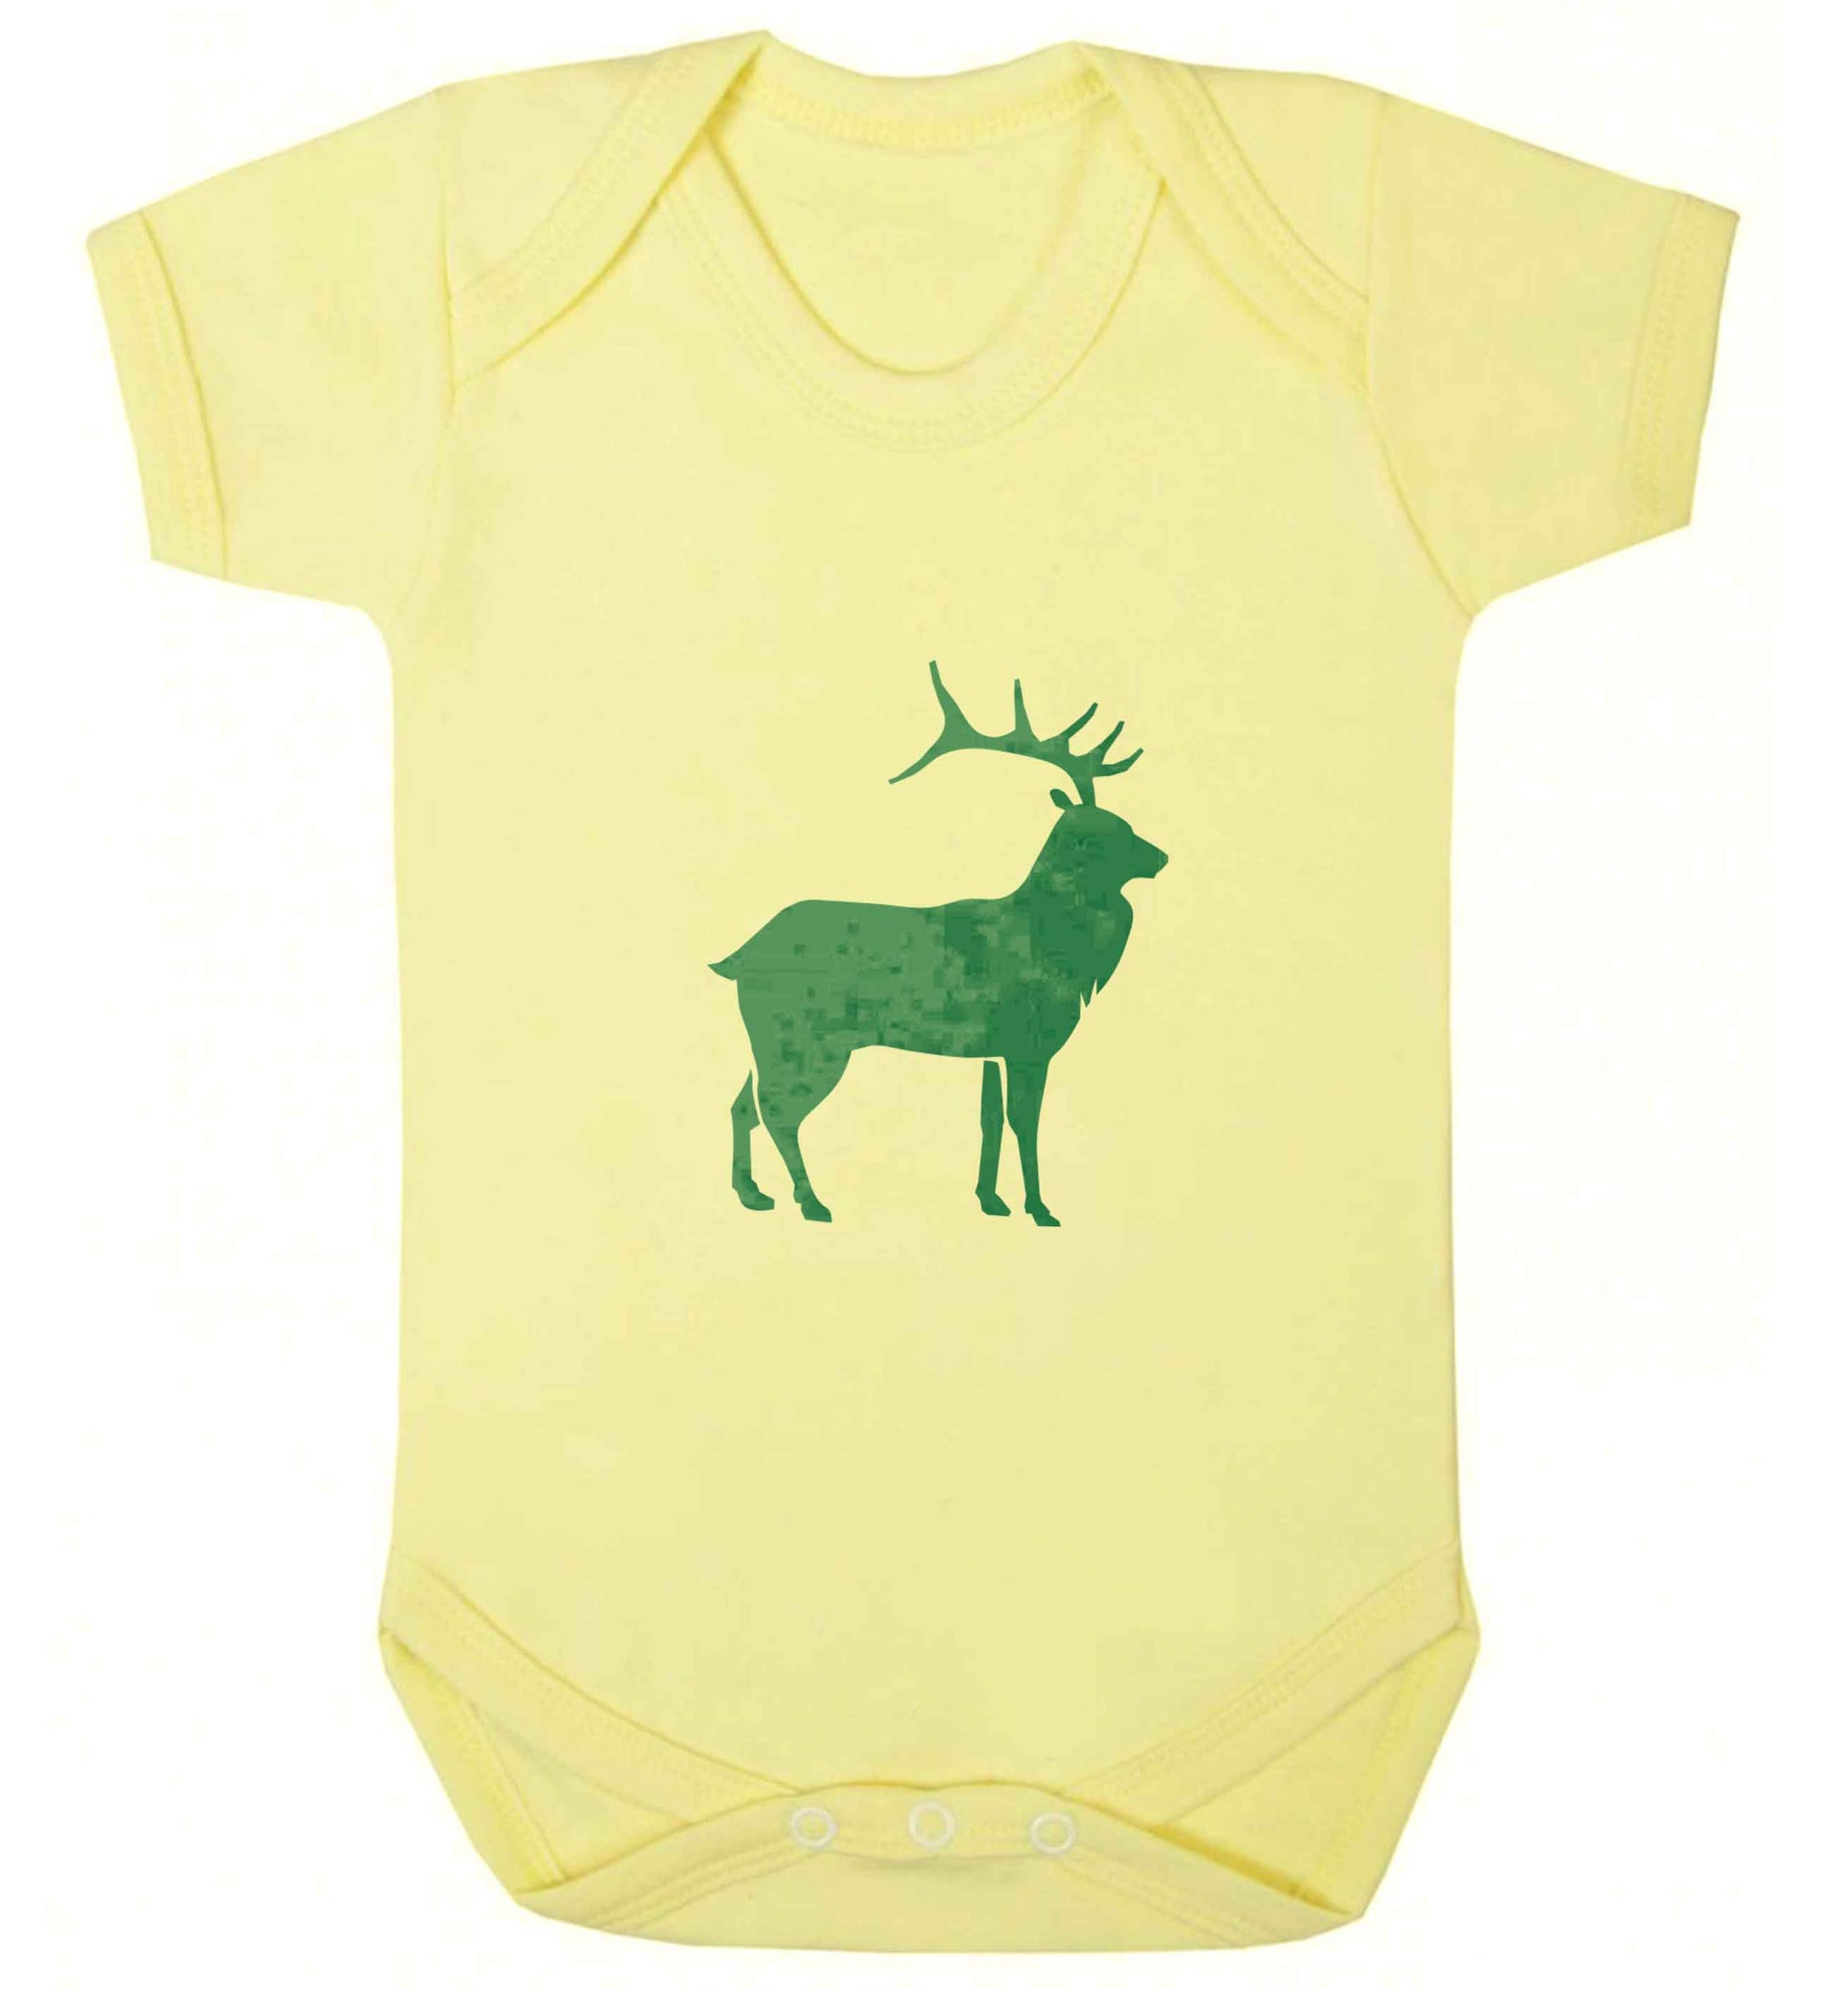 Green stag baby vest pale yellow 18-24 months